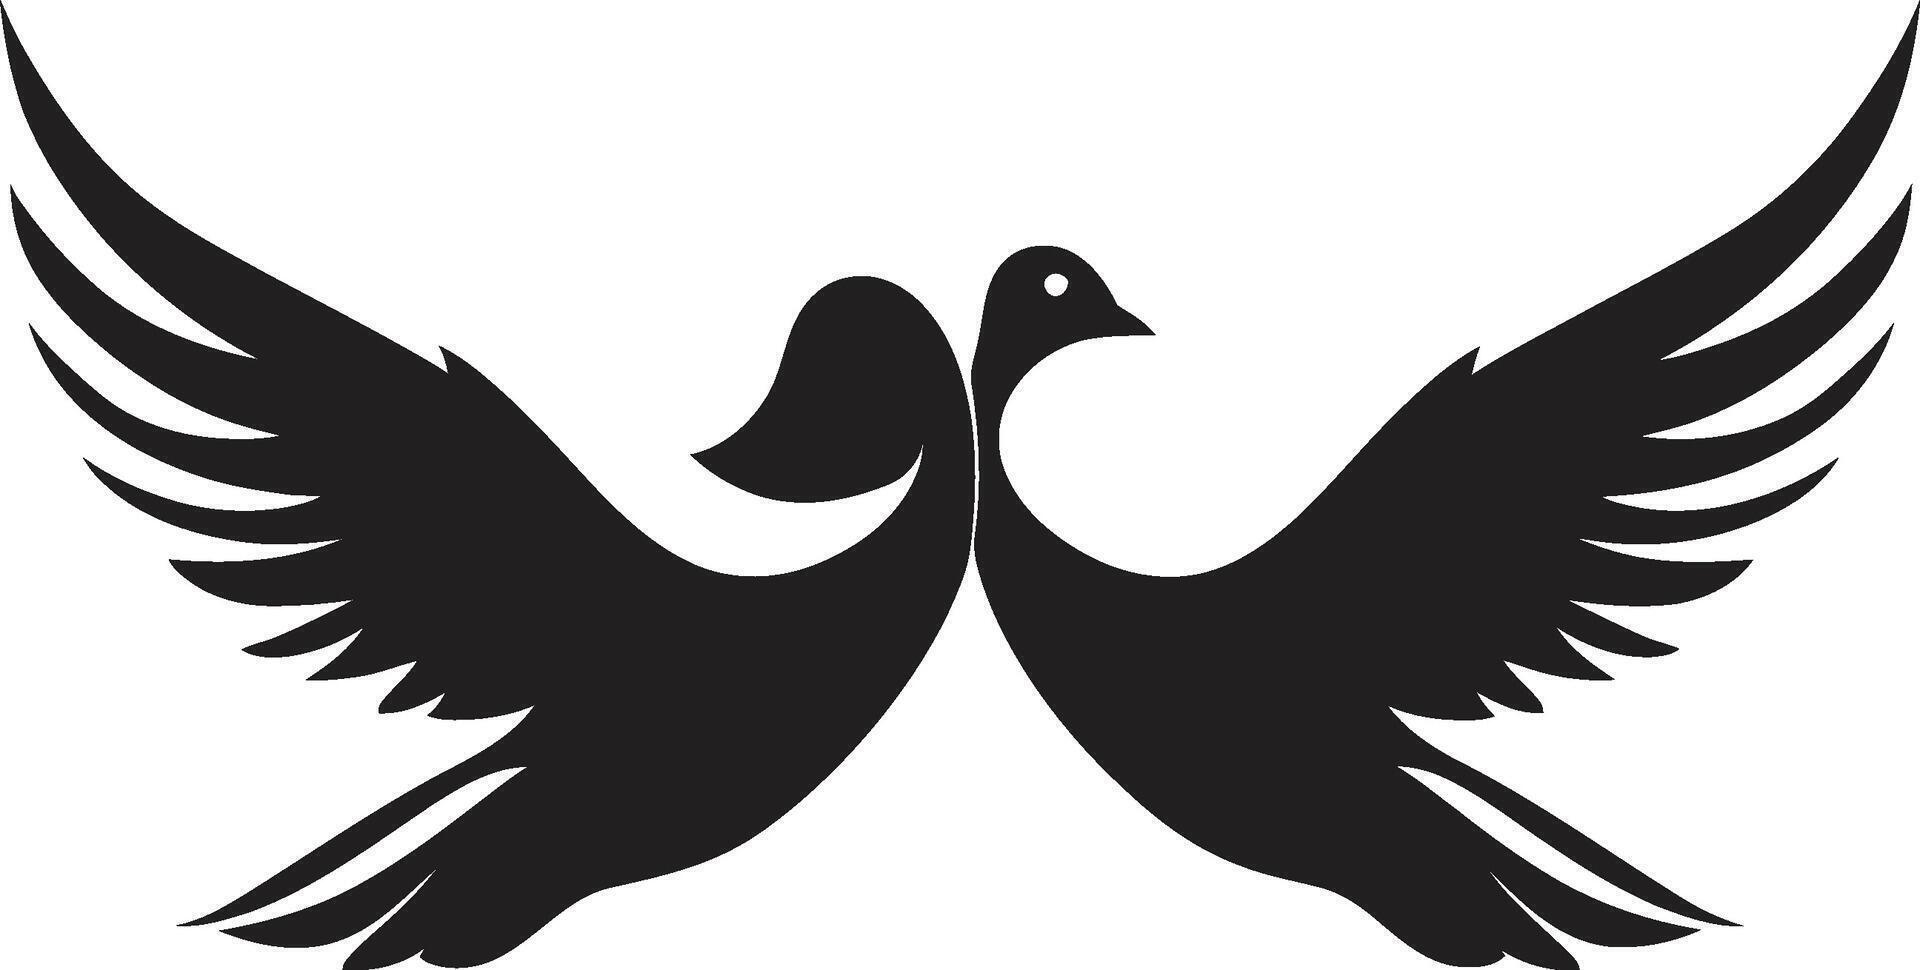 Feathered Union of a Dove Pair Flight of Compassion Dove Pair Element vector